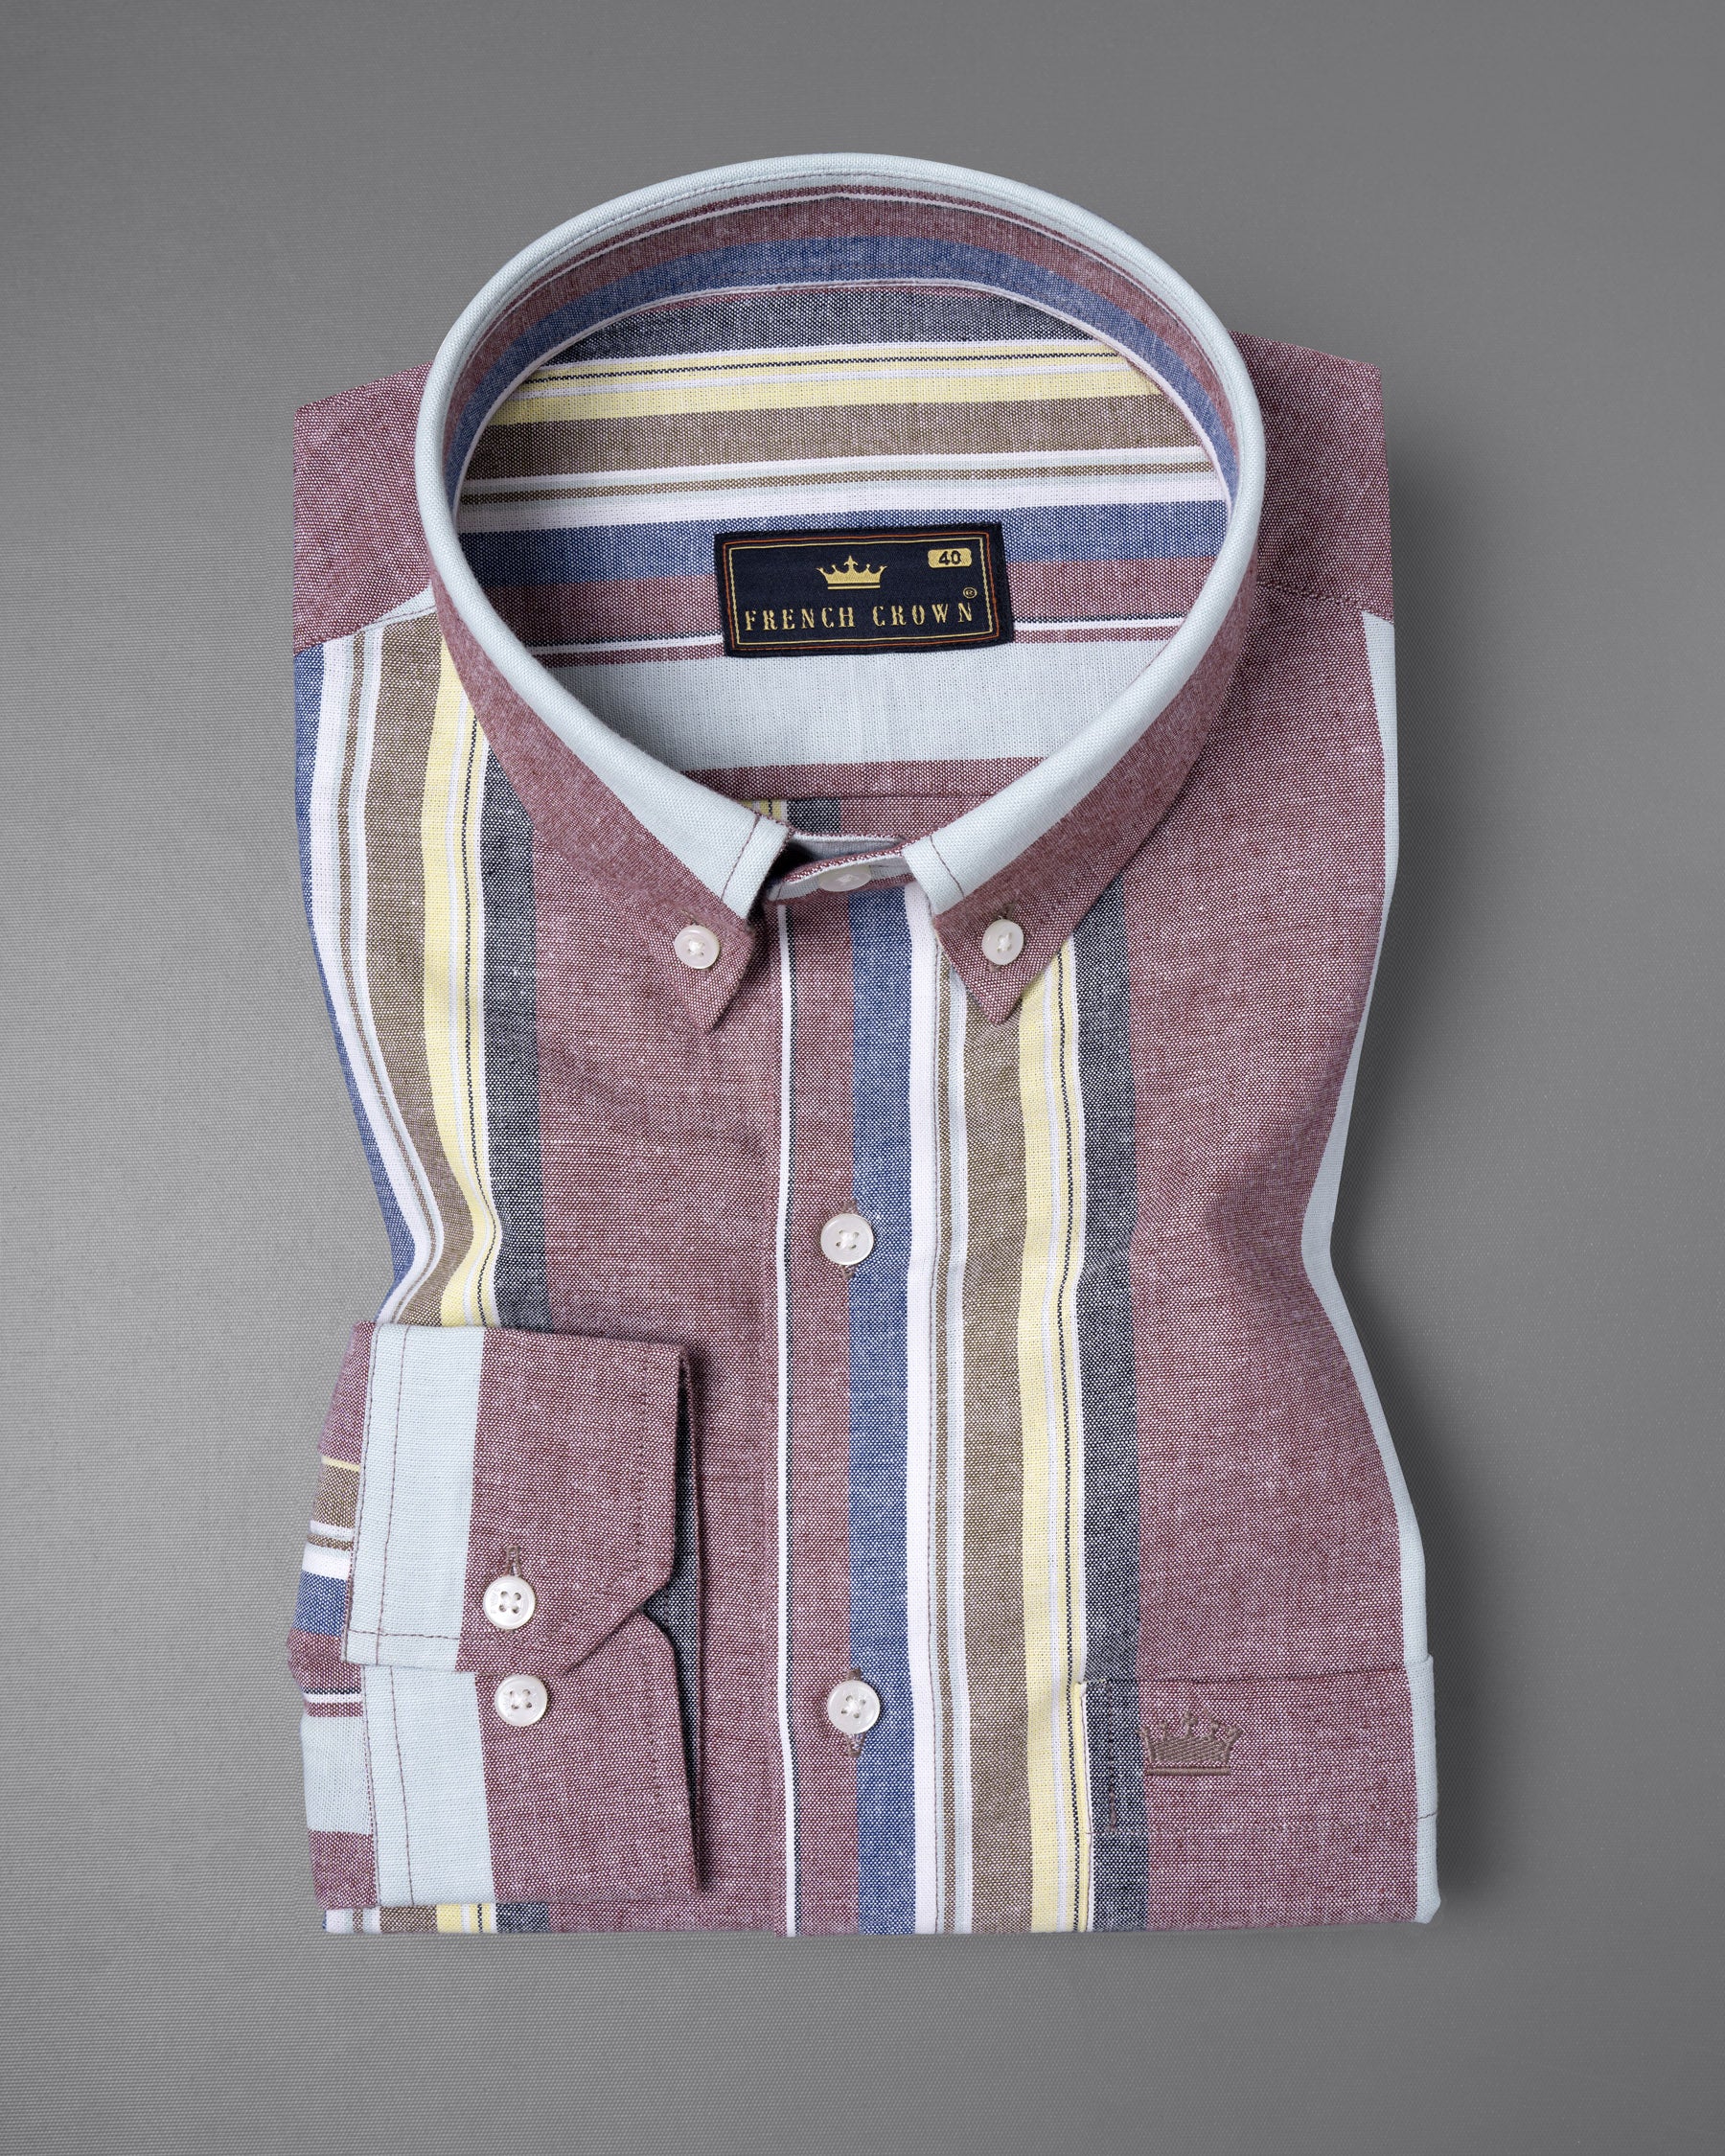 Opium with Dolphin Blue Multicolour Striped Royal Oxford Shirt 5543-BD-38, 5543-BD-H-38, 5543-BD-39, 5543-BD-H-39, 5543-BD-40, 5543-BD-H-40, 5543-BD-42, 5543-BD-H-42, 5543-BD-44, 5543-BD-H-44, 5543-BD-46, 5543-BD-H-46, 5543-BD-48, 5543-BD-H-48, 5543-BD-50, 5543-BD-H-50, 5543-BD-52, 5543-BD-H-52